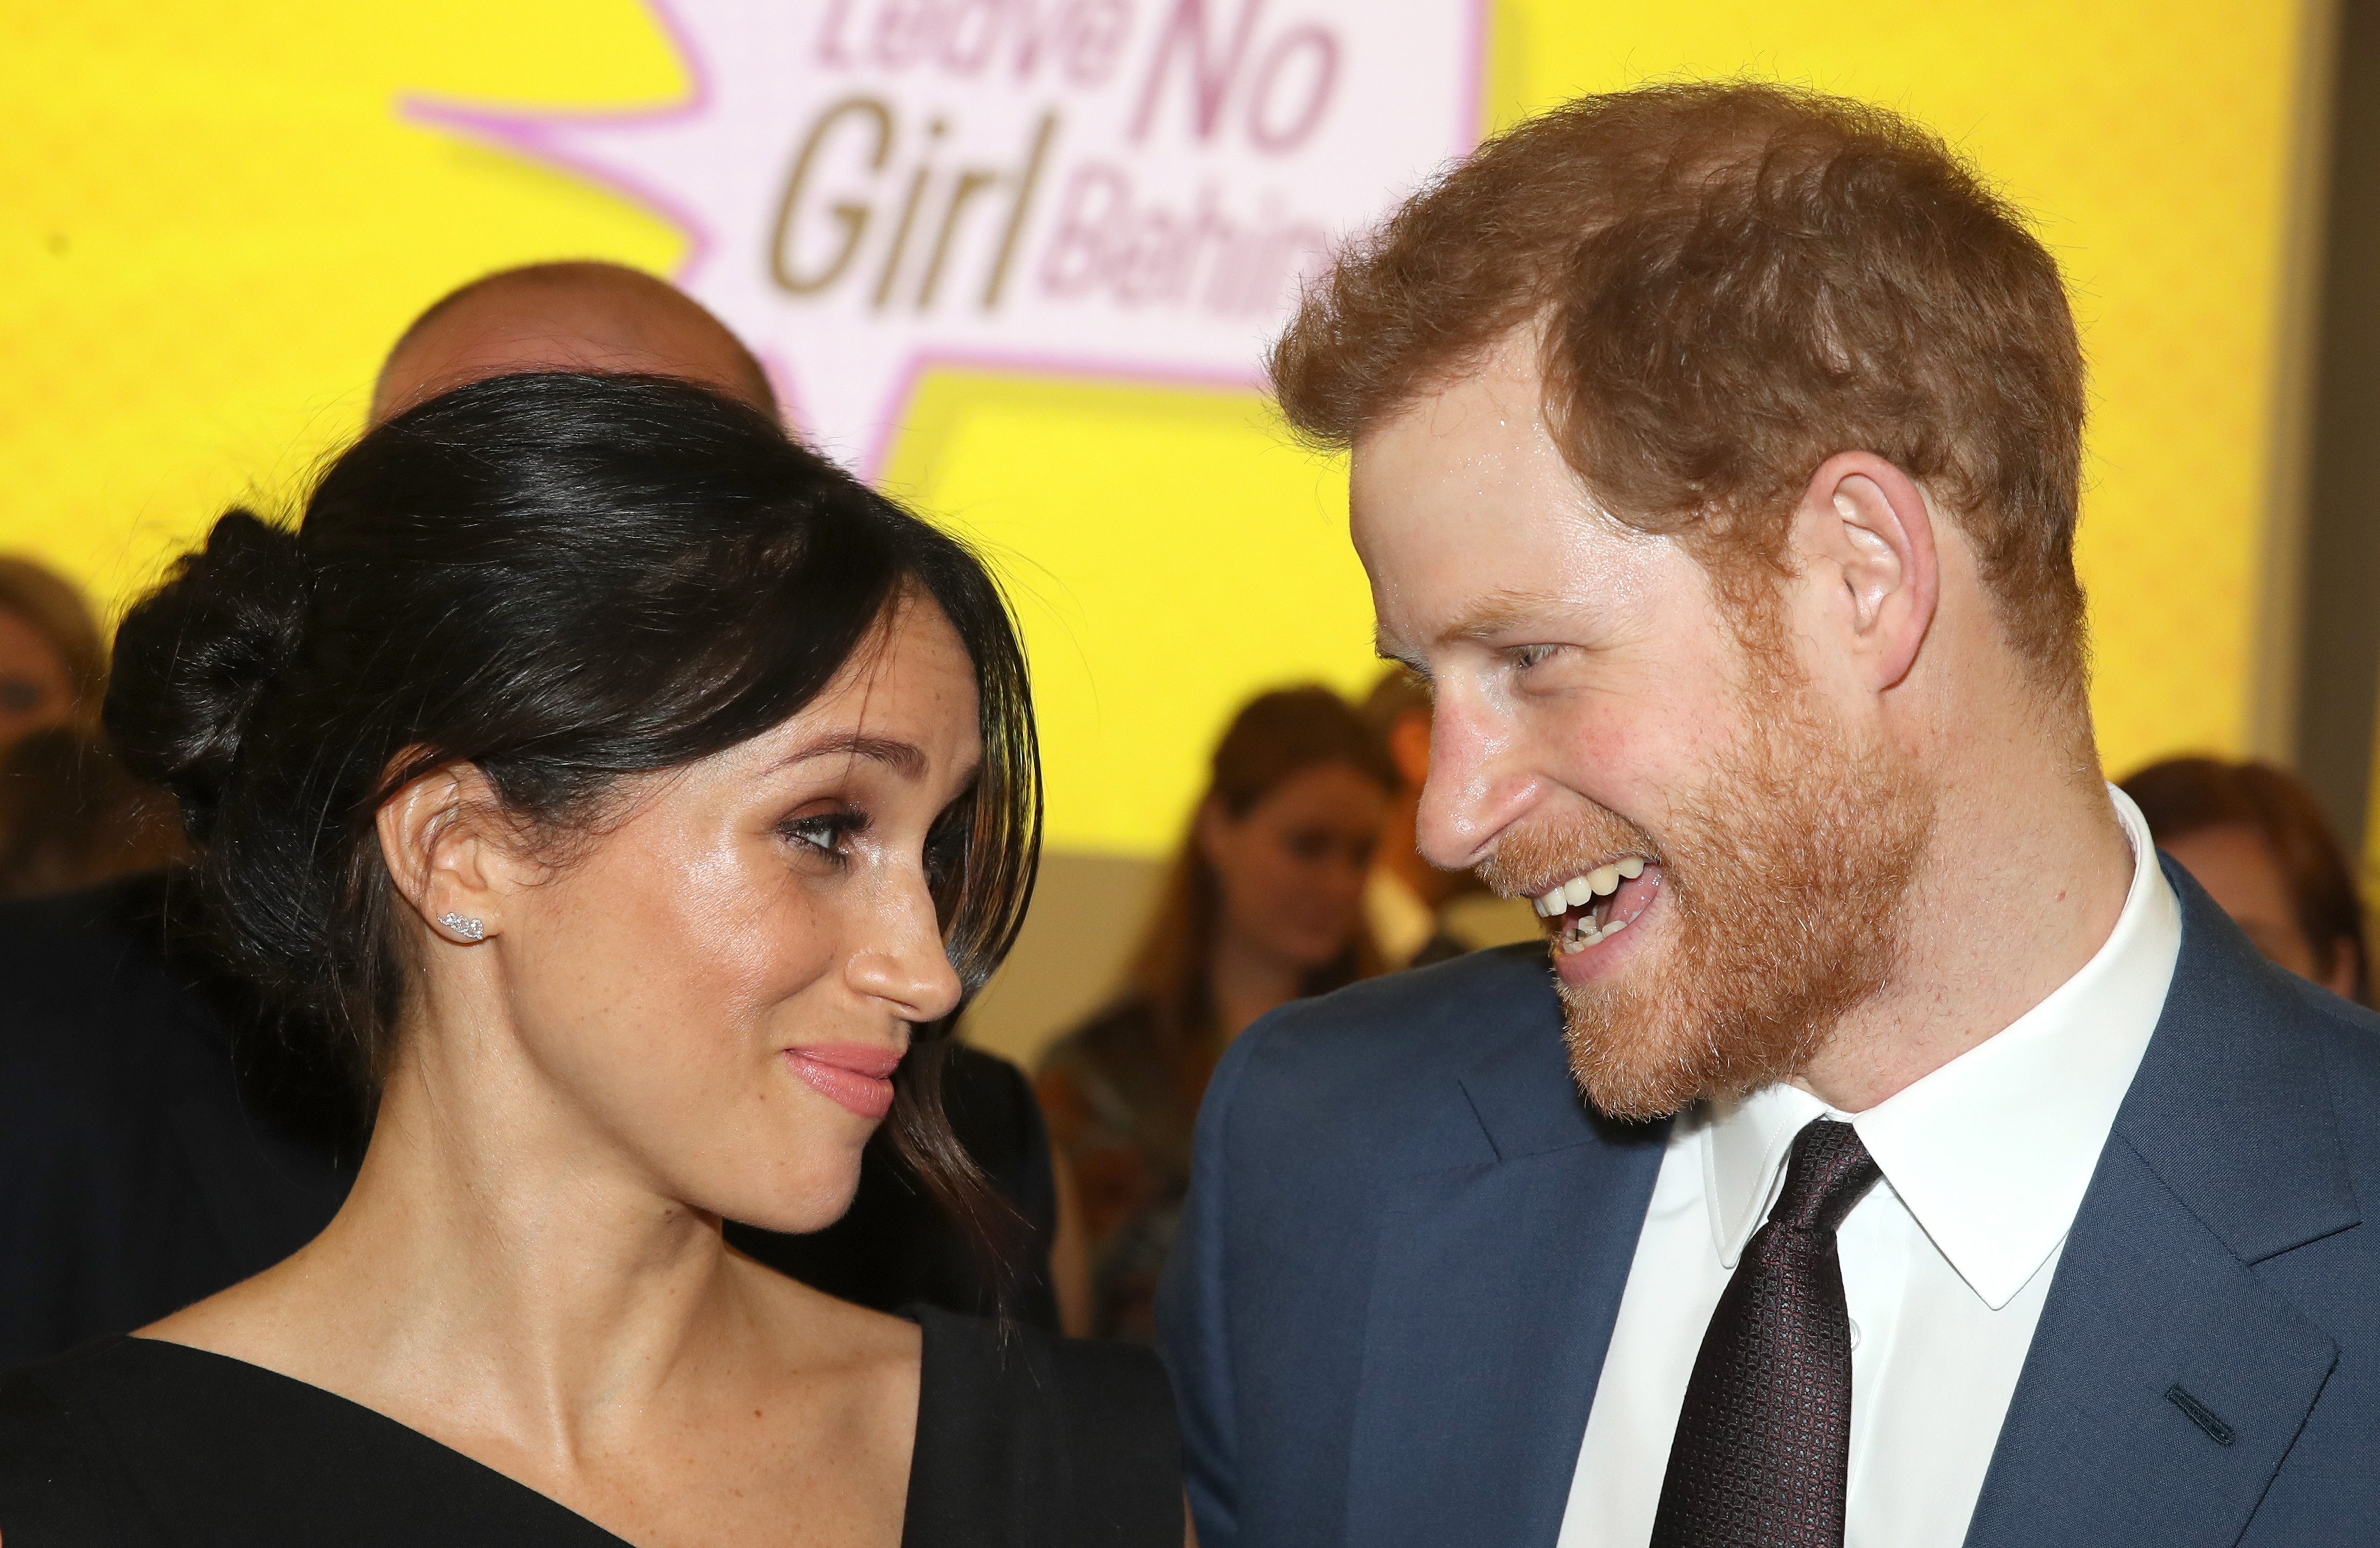 Meghan Markle and Prince Harry attend the Women's Empowerment reception